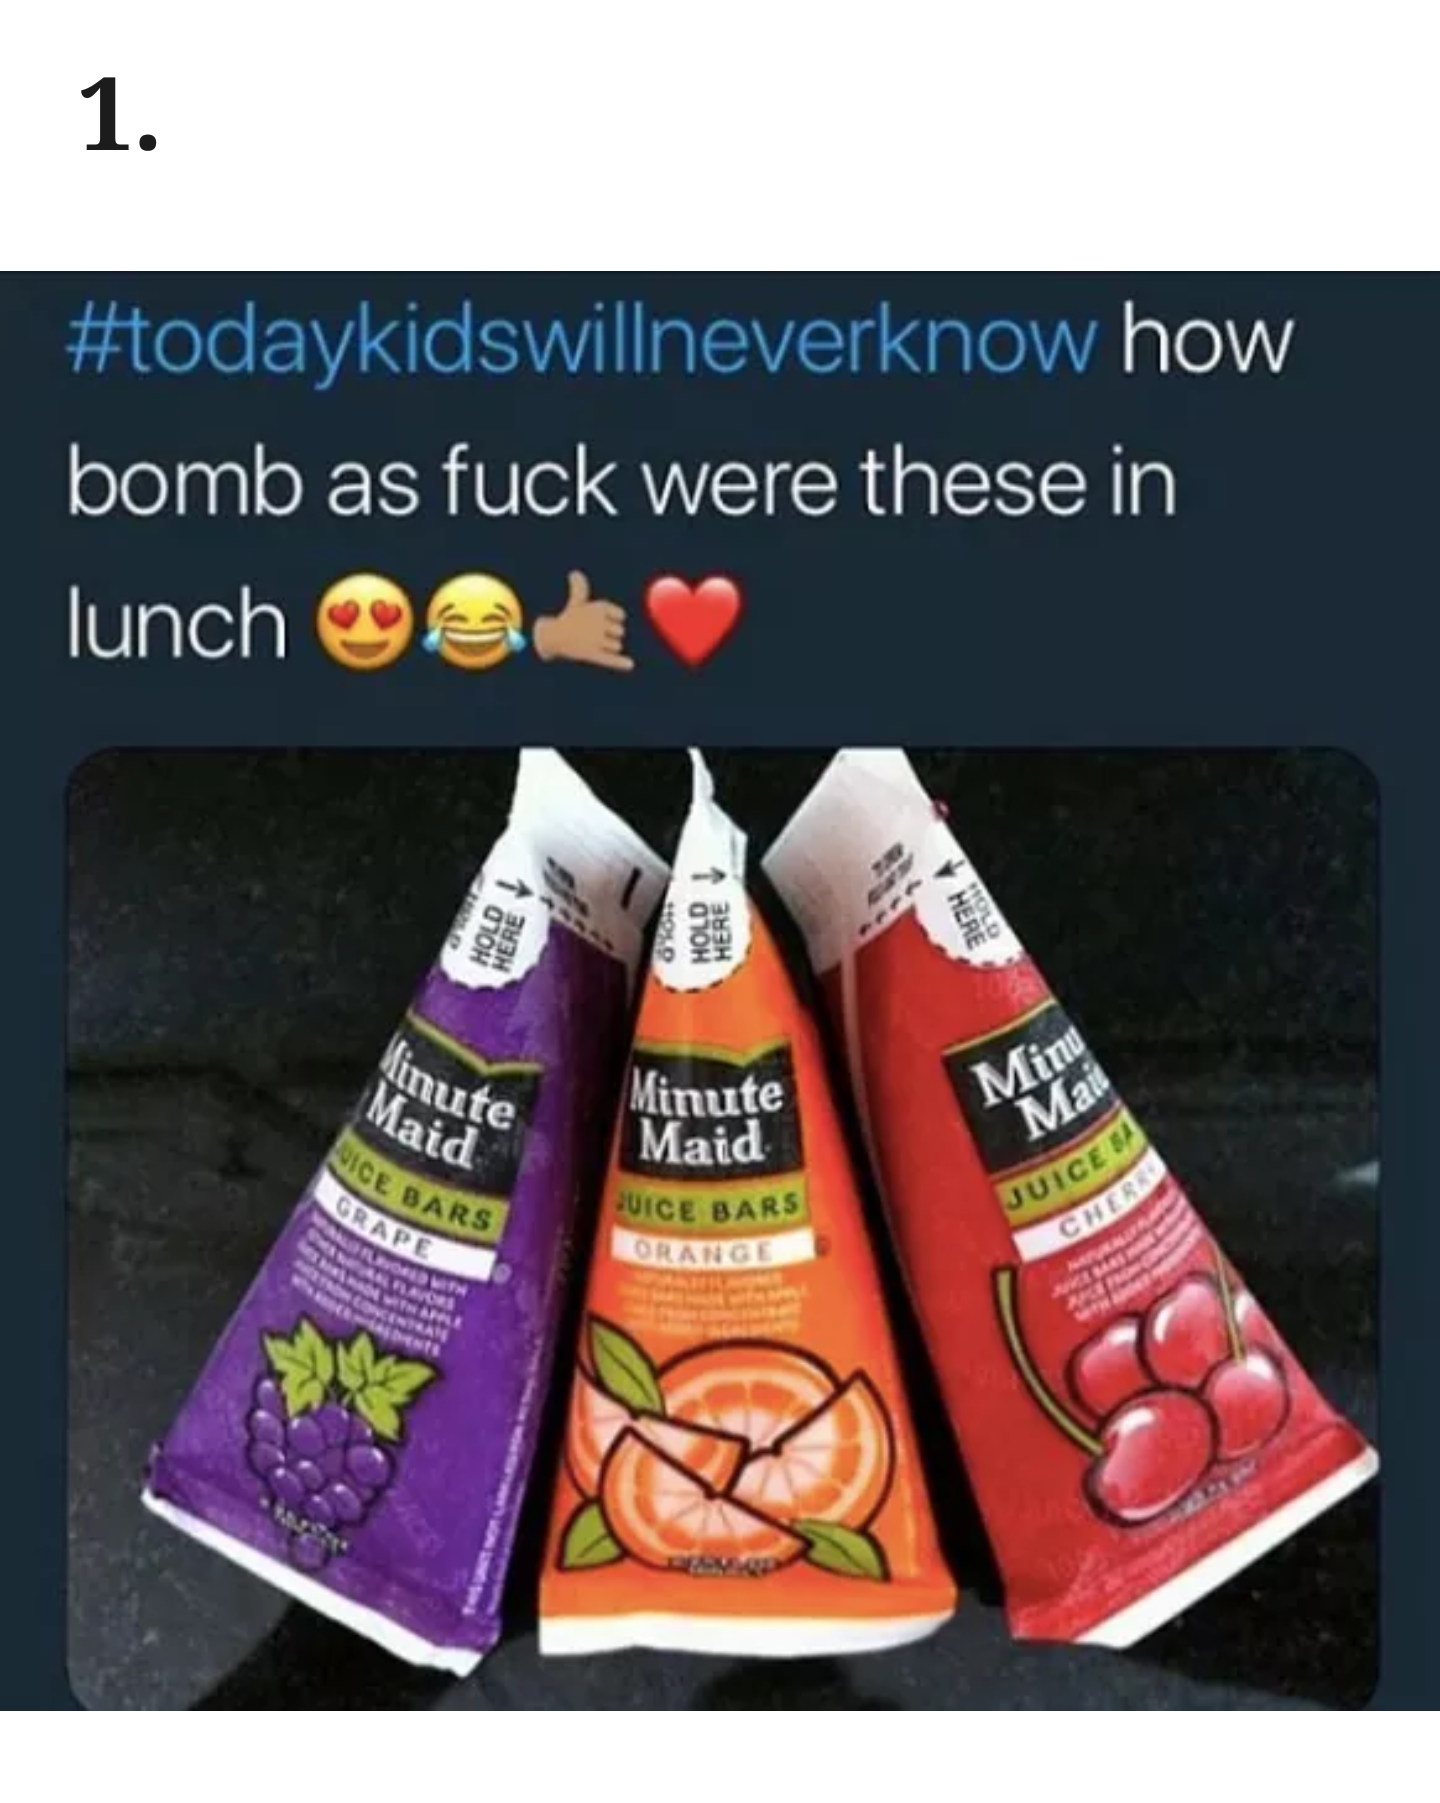 minute maid juice bars 90s - 1. how bomb as fuck were these in lunch a 1912 Maid nute Min Minute Maid Uice Bars Juice